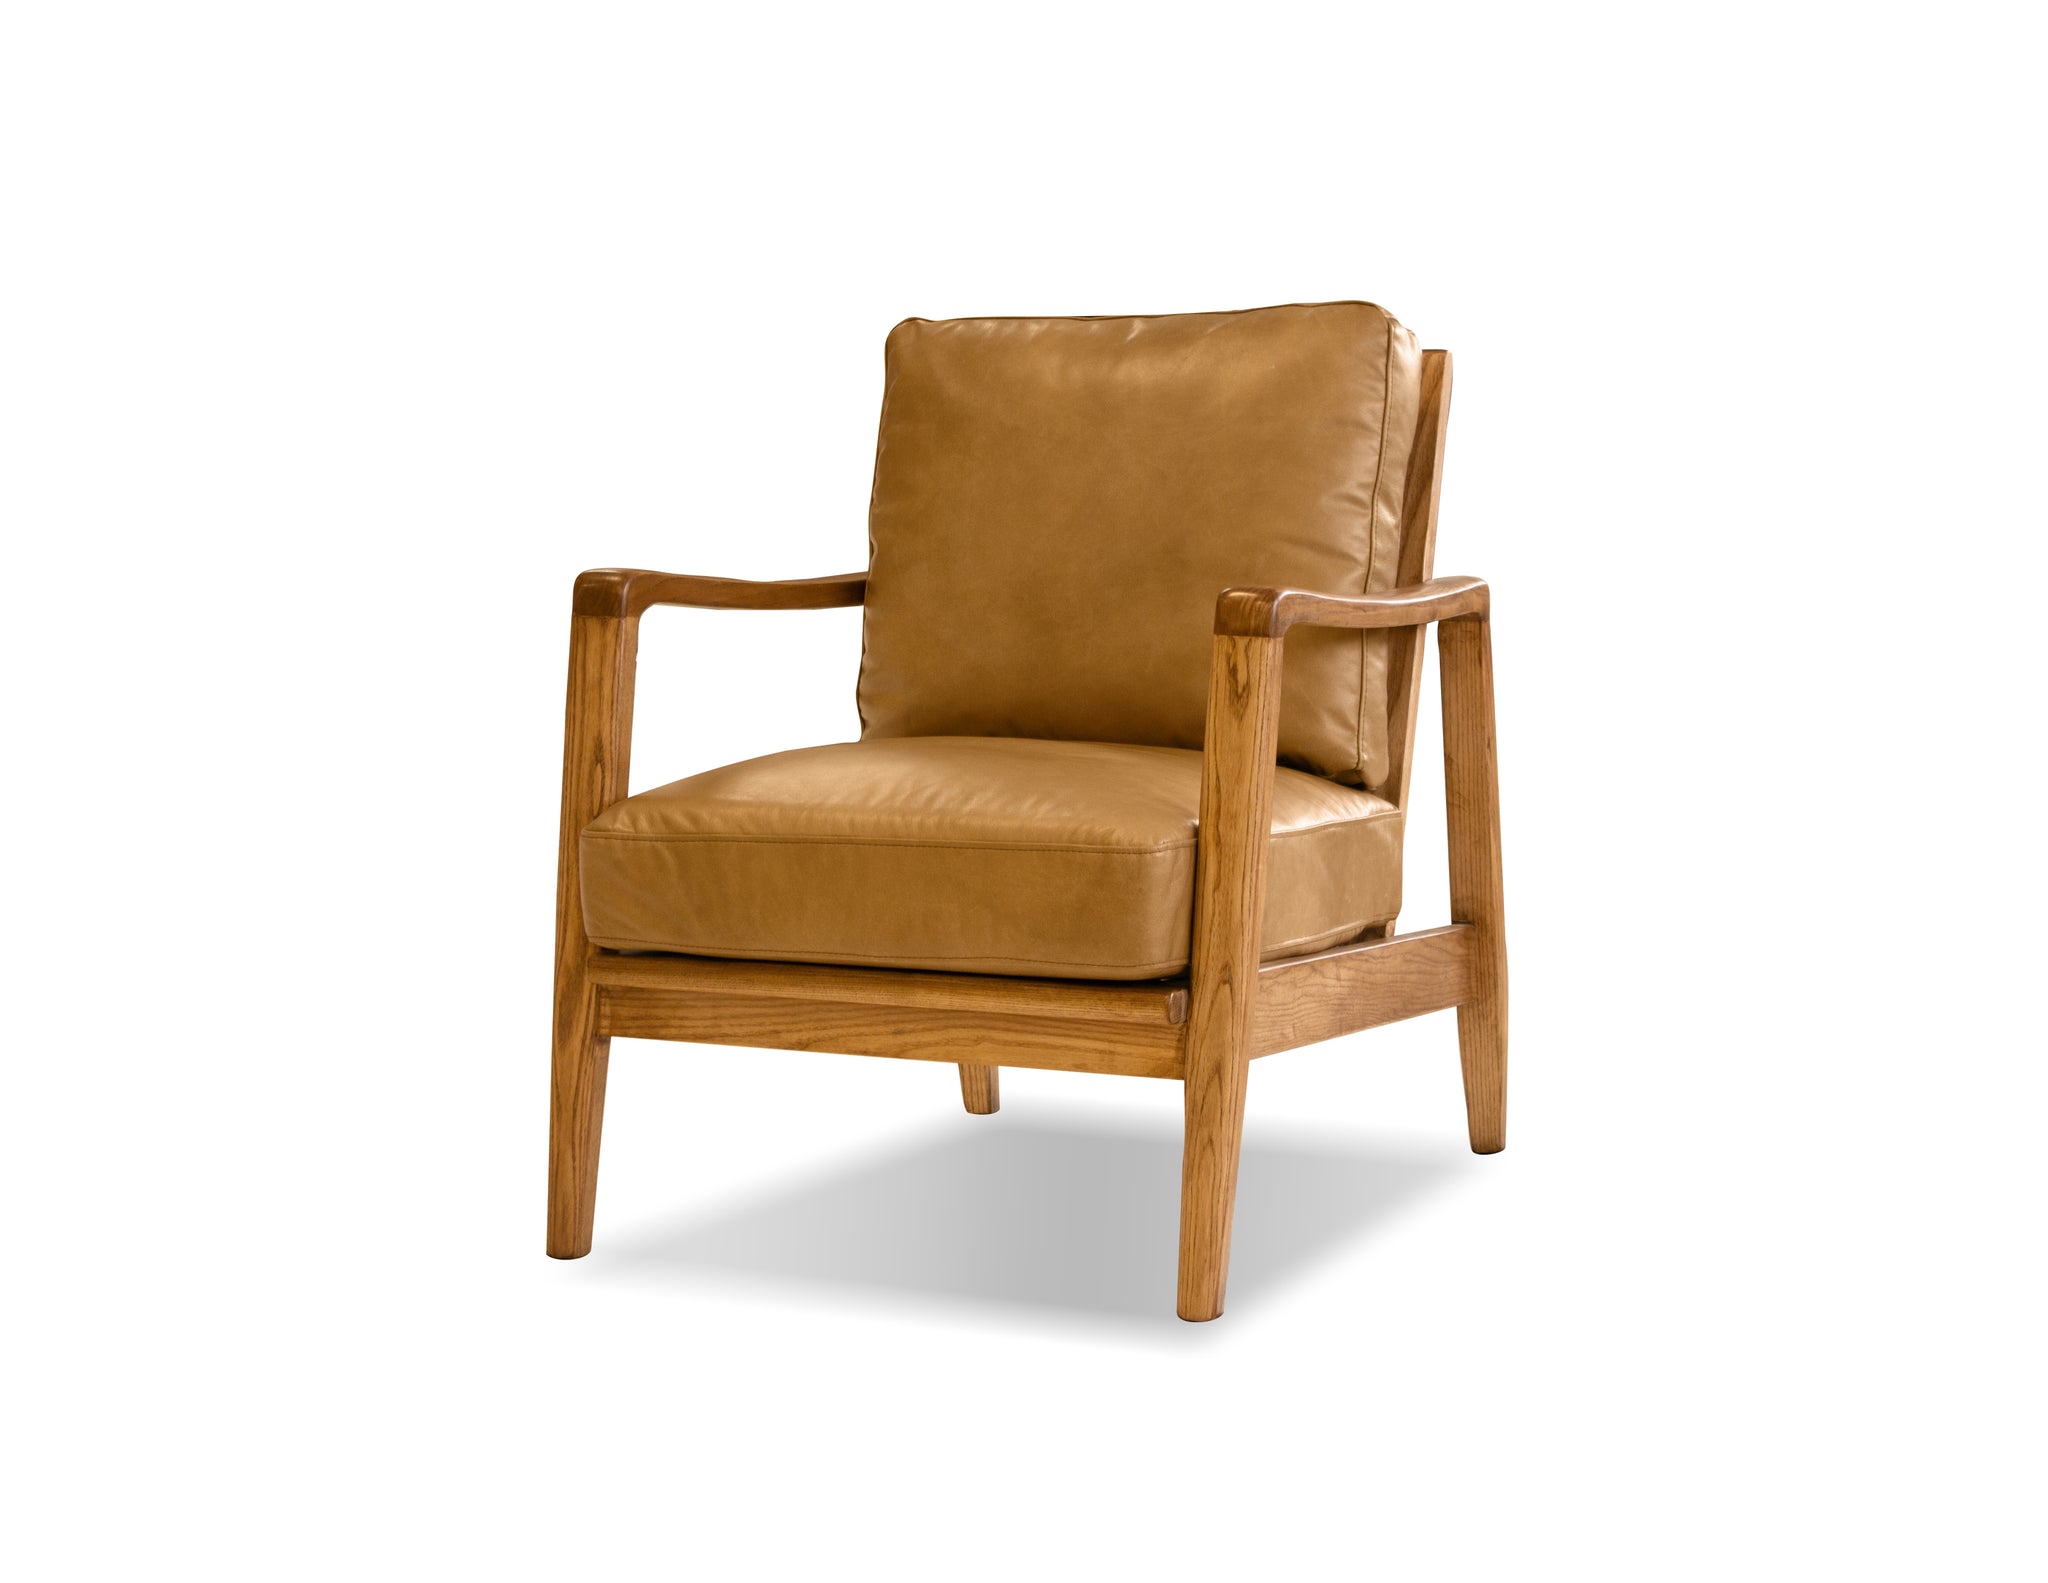 Picture of Craftsman Lounge Chair - Tan Leather